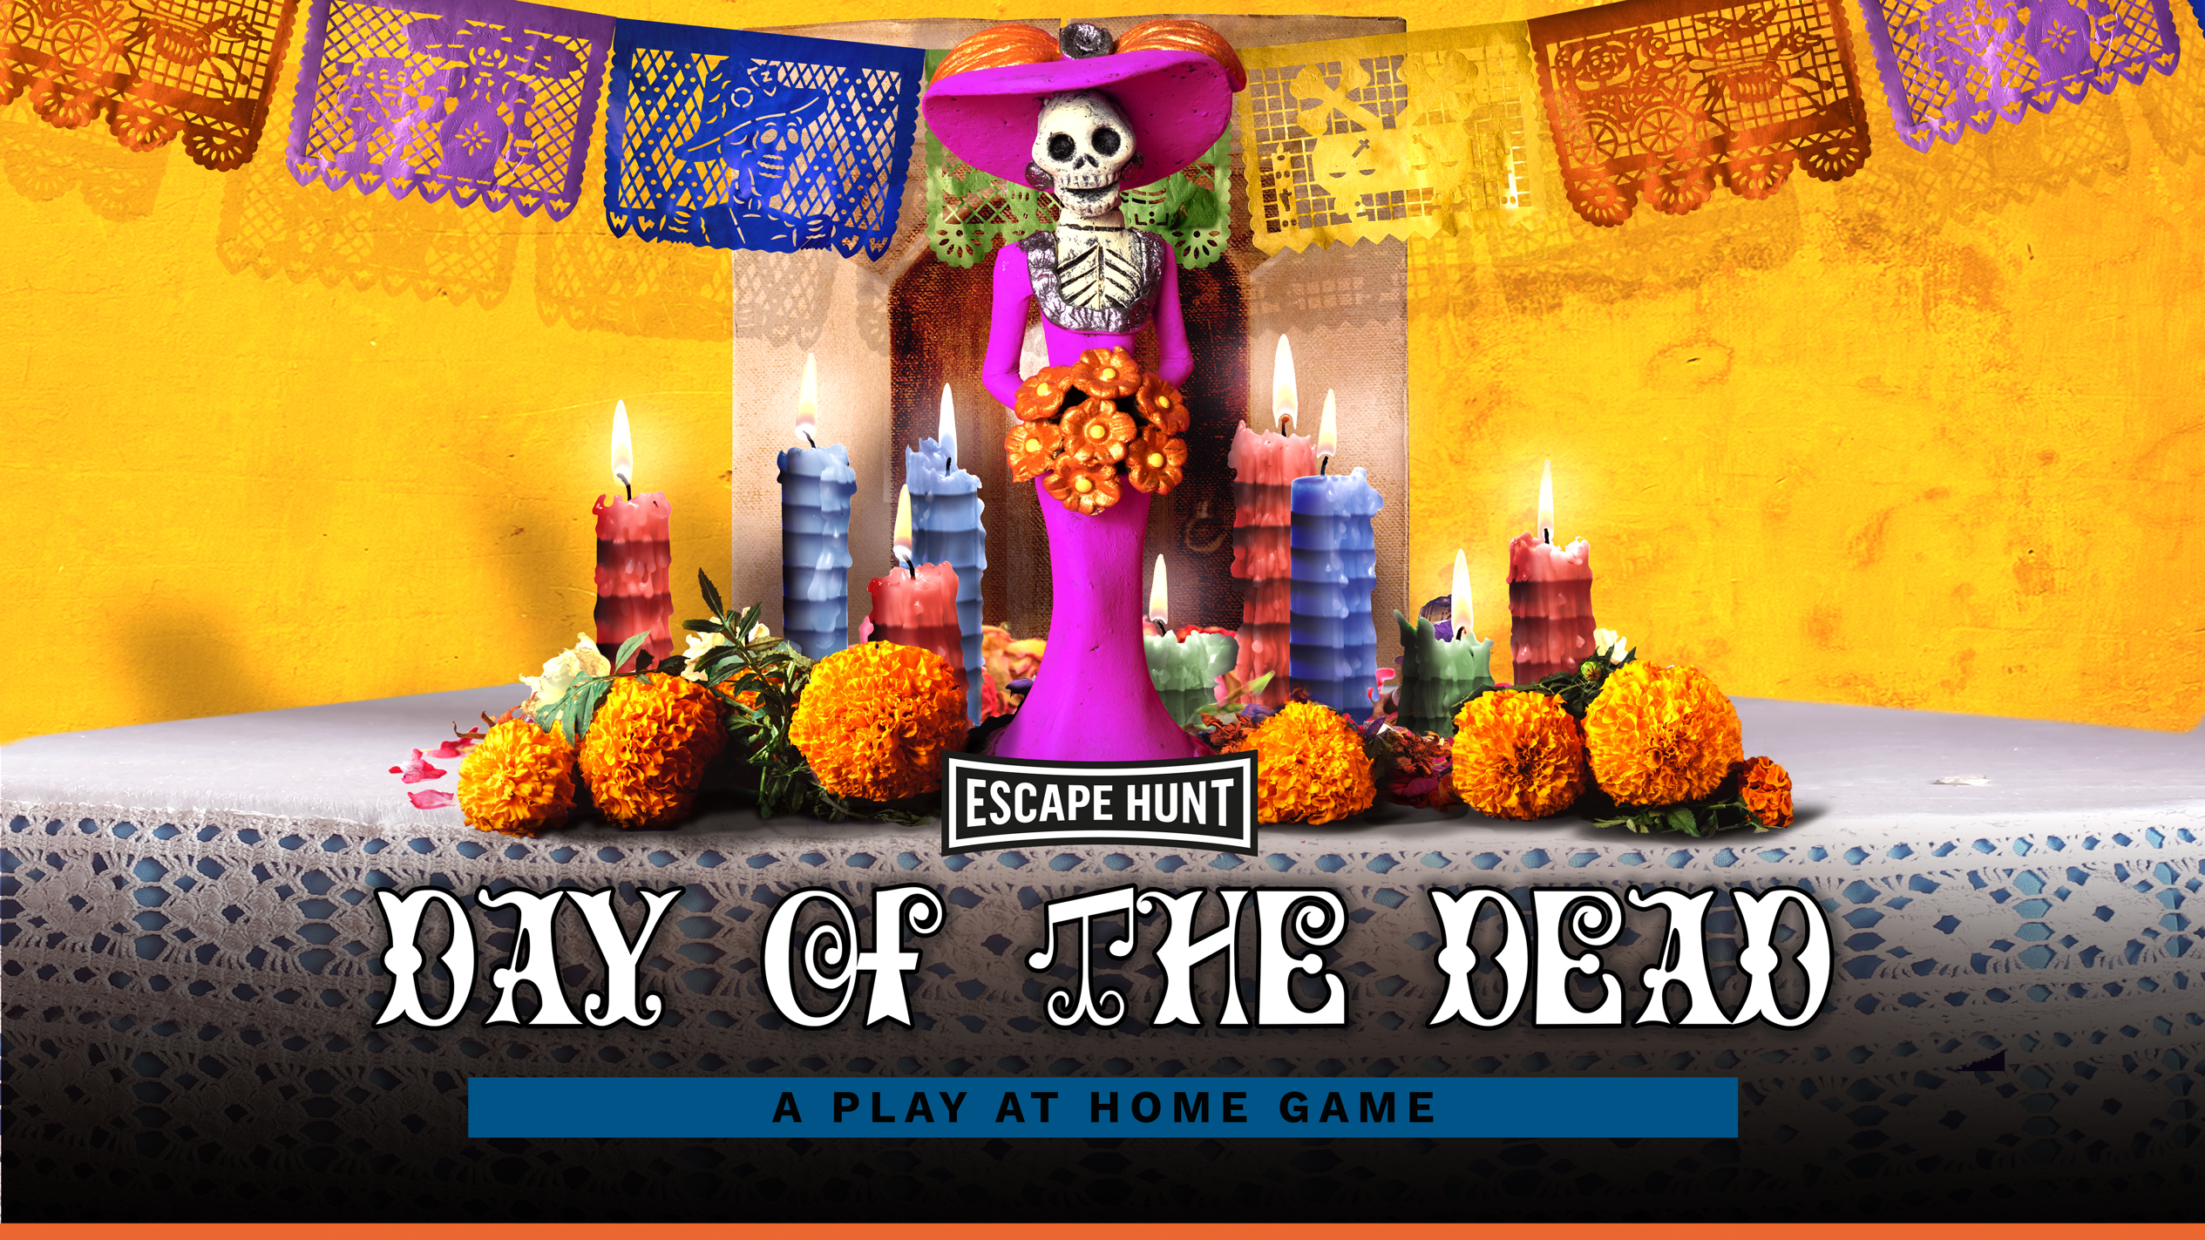 DAY OF THE DEATH – PLAY HALLOWEEN AT HOME!